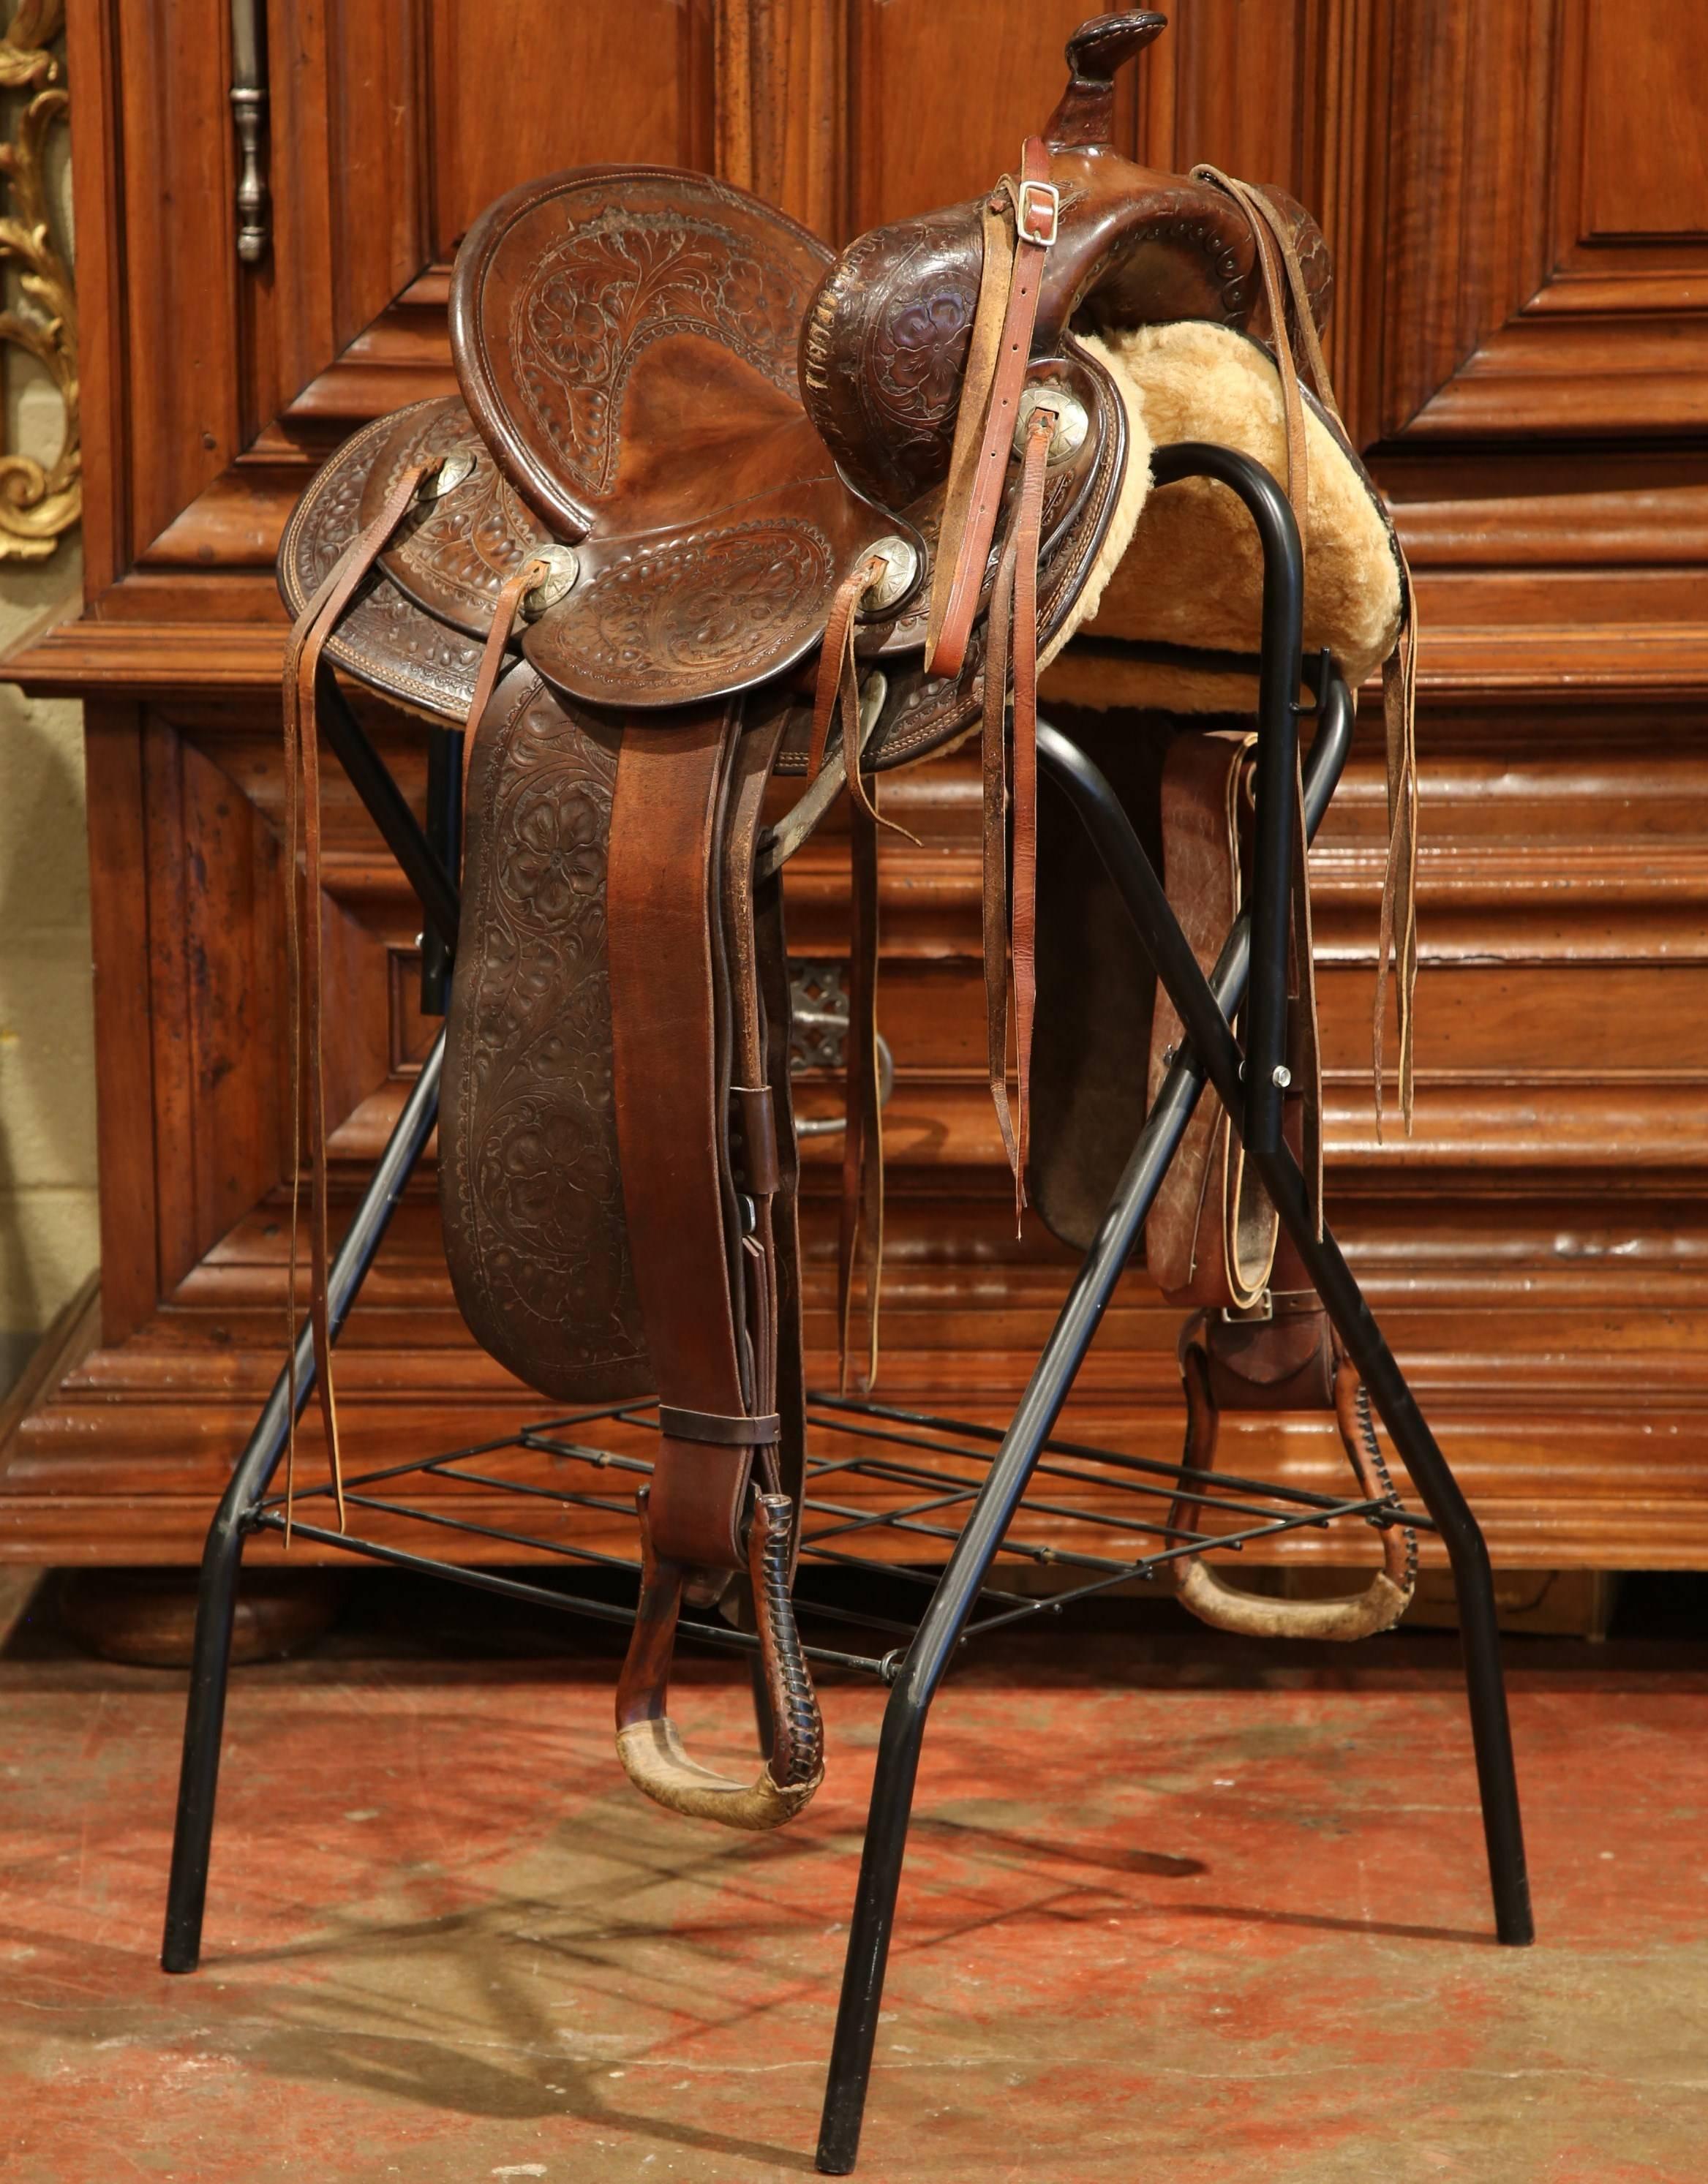 Decorate a ranch style home with this beautifully kept antique brown leather saddle from the early 20th century. The saddle, stamped on the front "Hamley and Co Makers Pendleton, ORE" and has initials JEJ on the back, sits on custom black